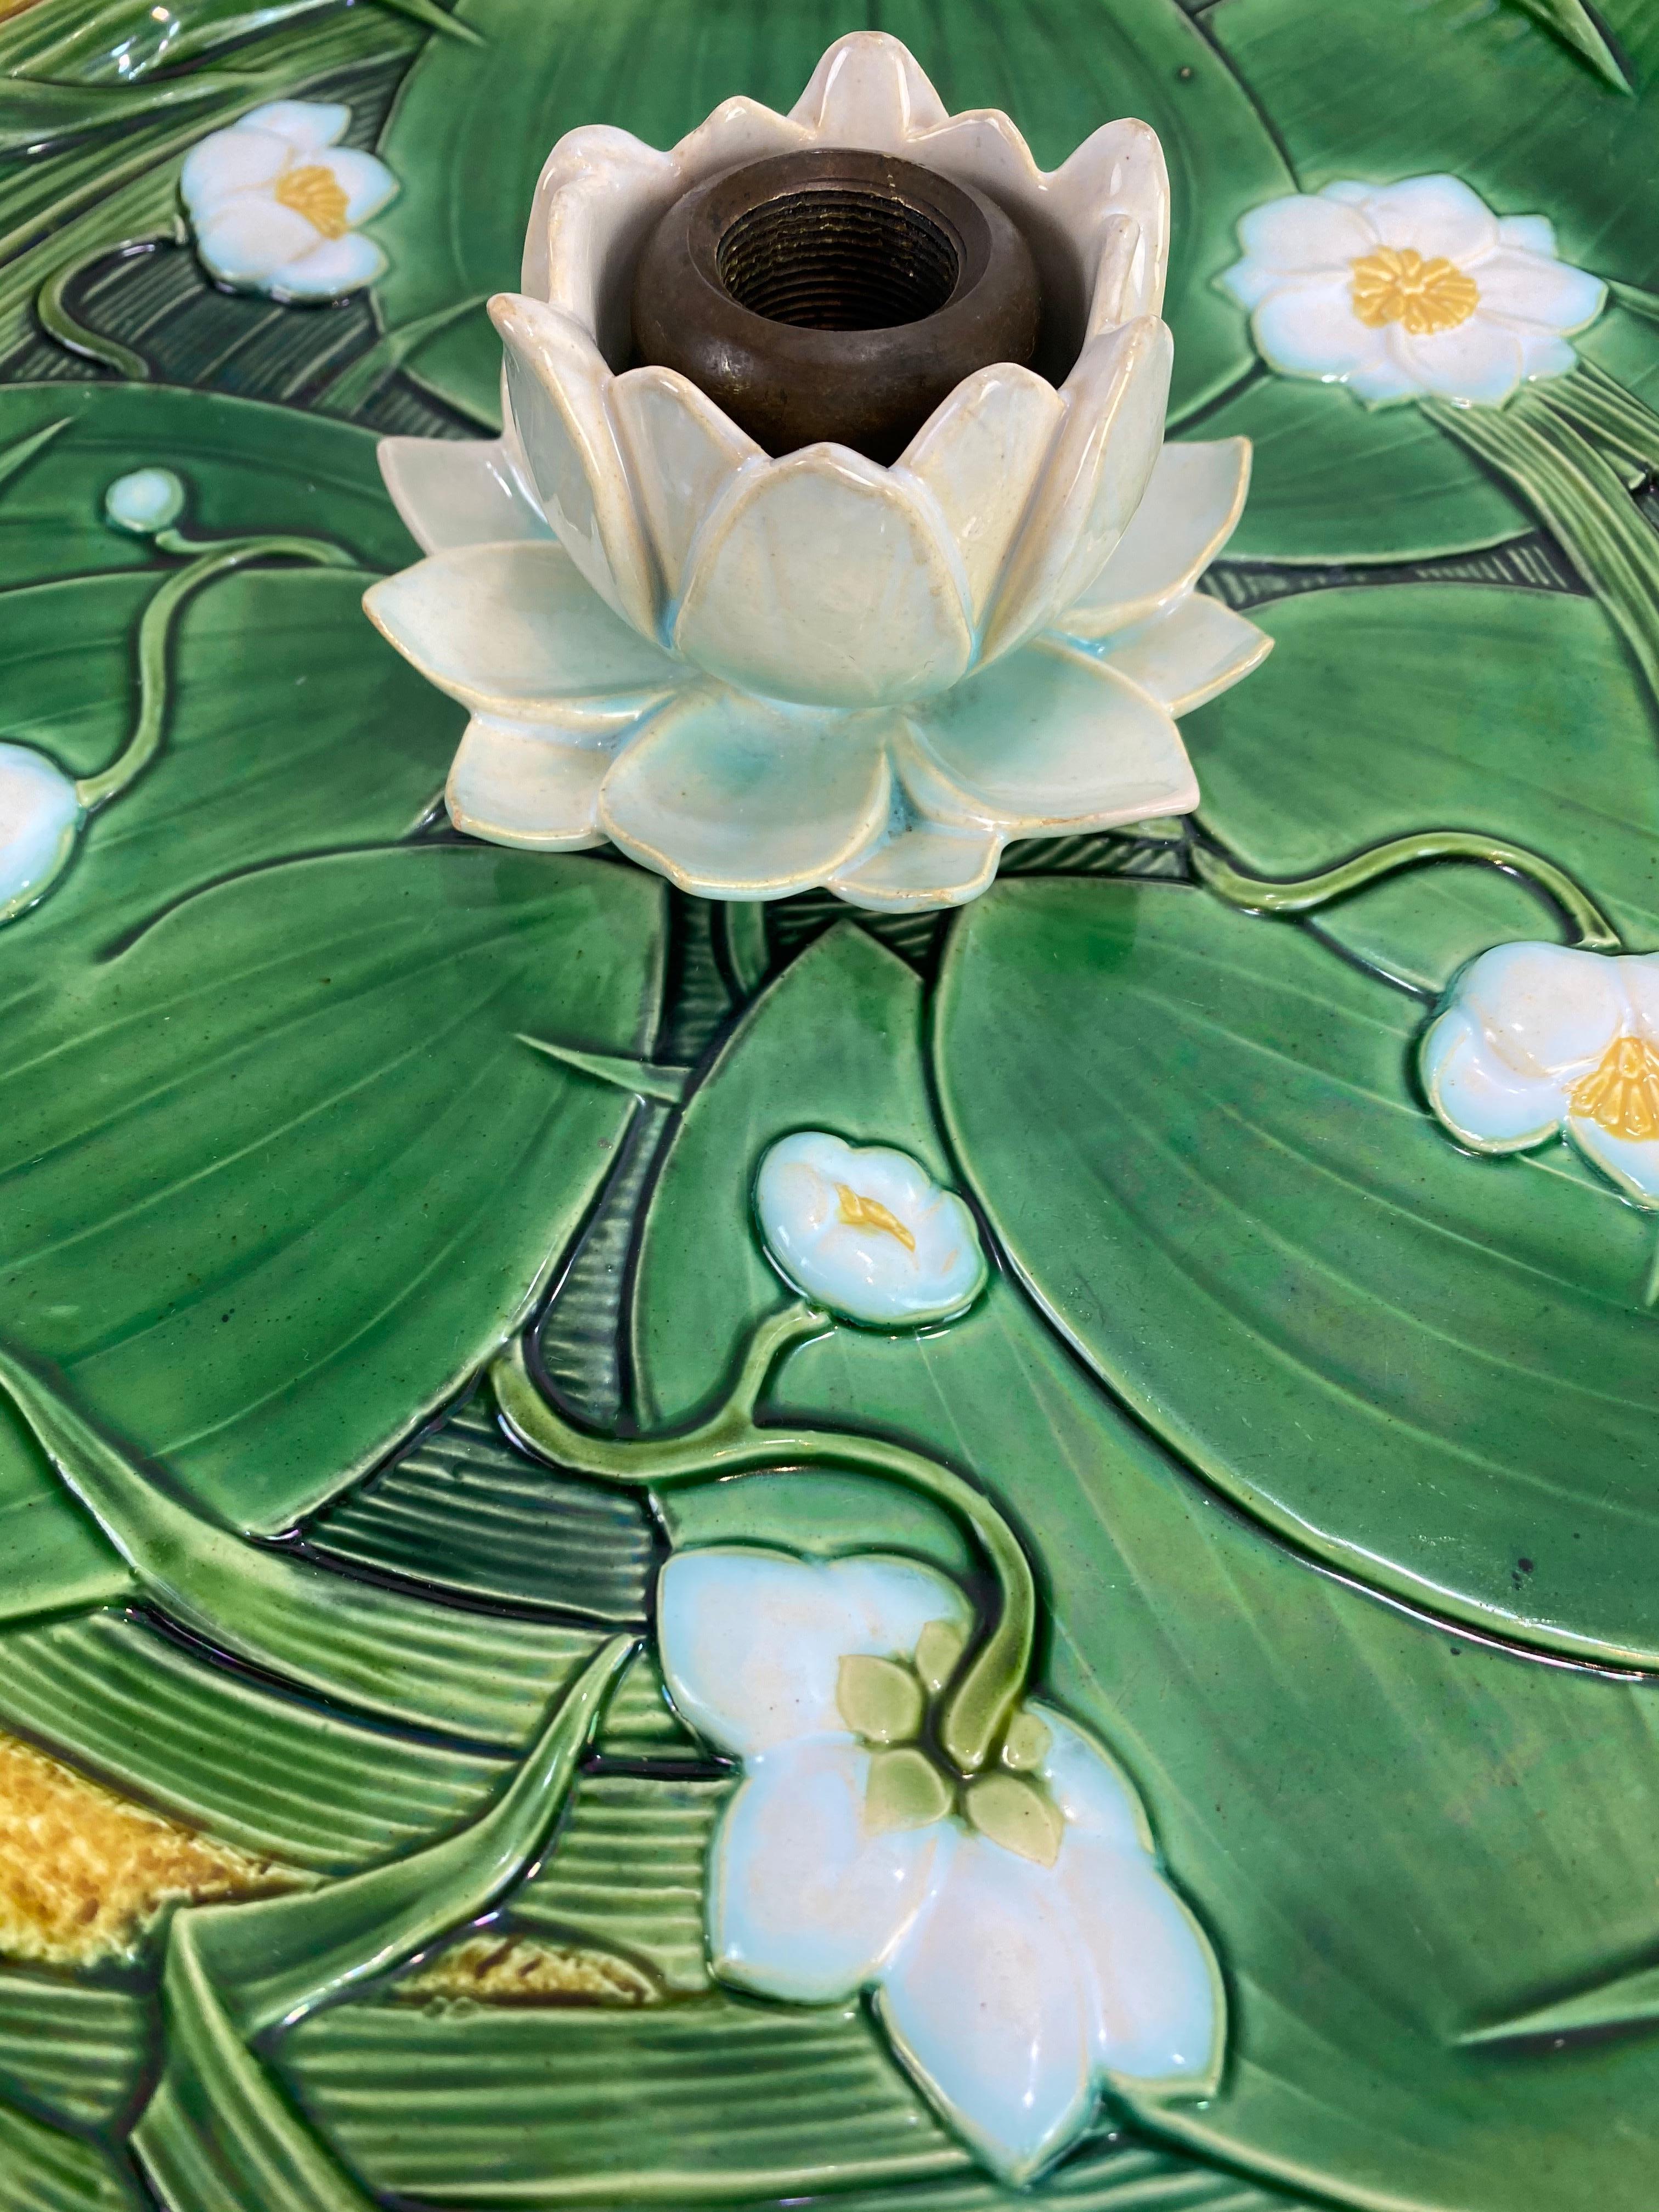 Molded Minton Majolica Centerpiece Tray 15-in, Lotus Flower on Green Ground, Dated 1863 For Sale